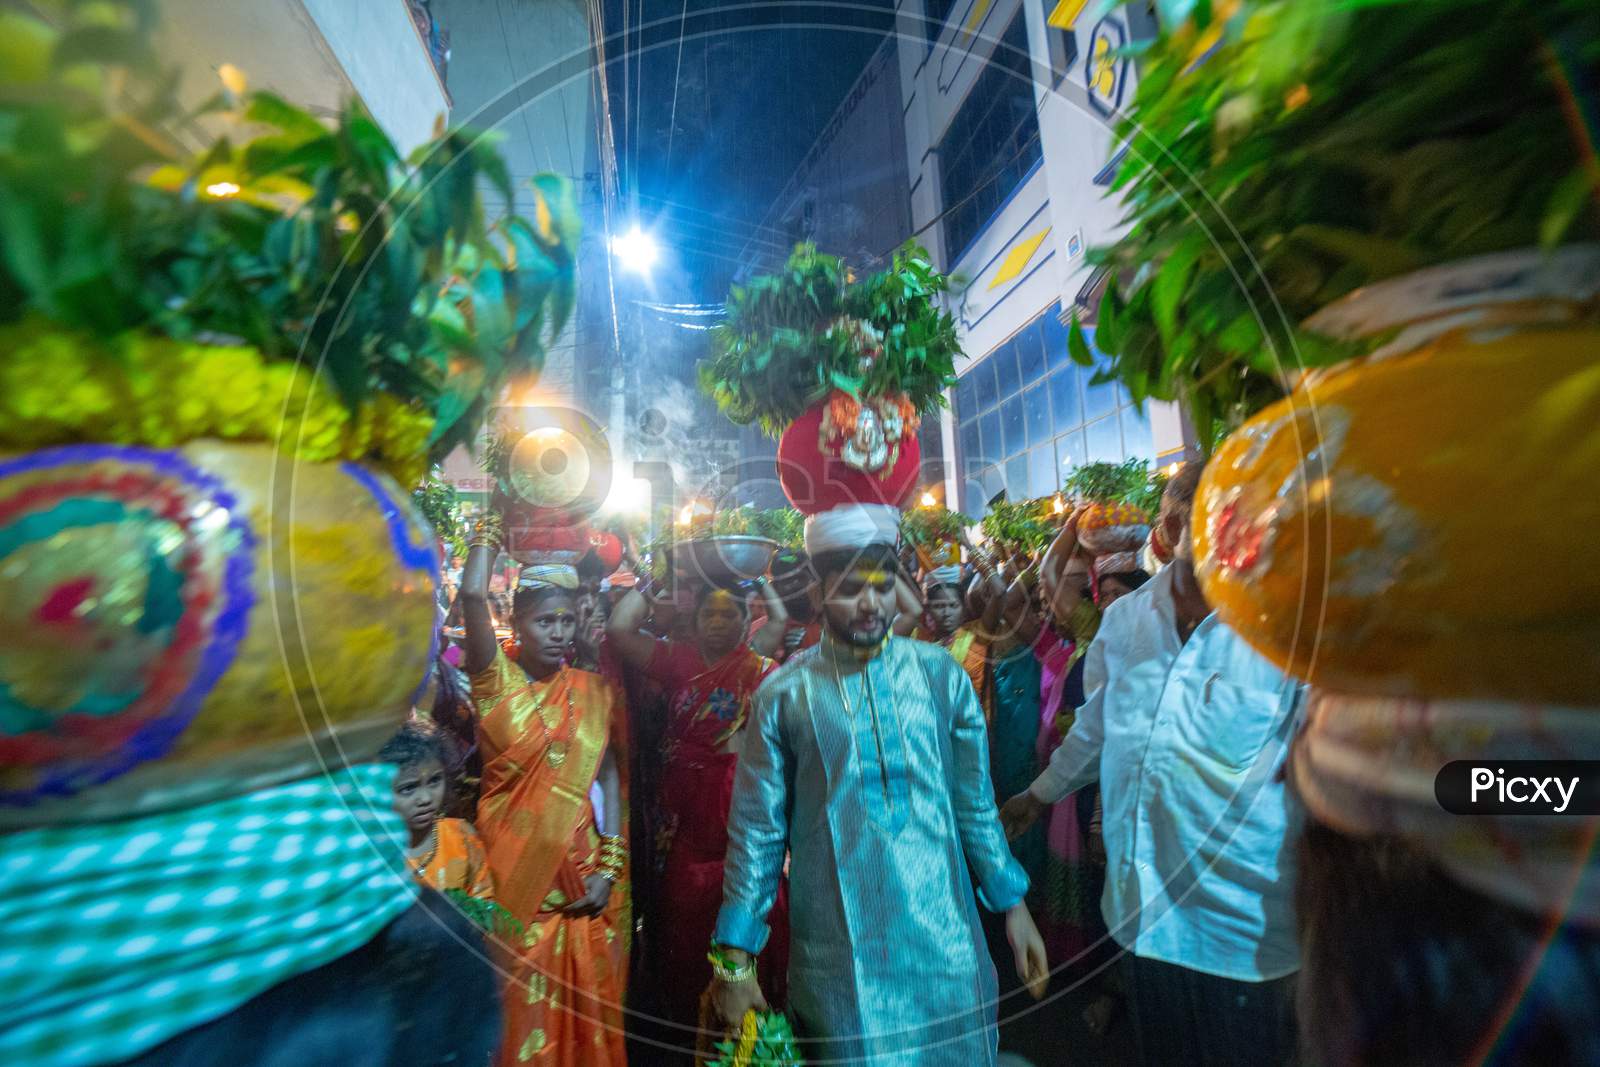 Devotees Carrying Bonam Over Their Heads At Bonalu Festival Celebrations in Hyderabad